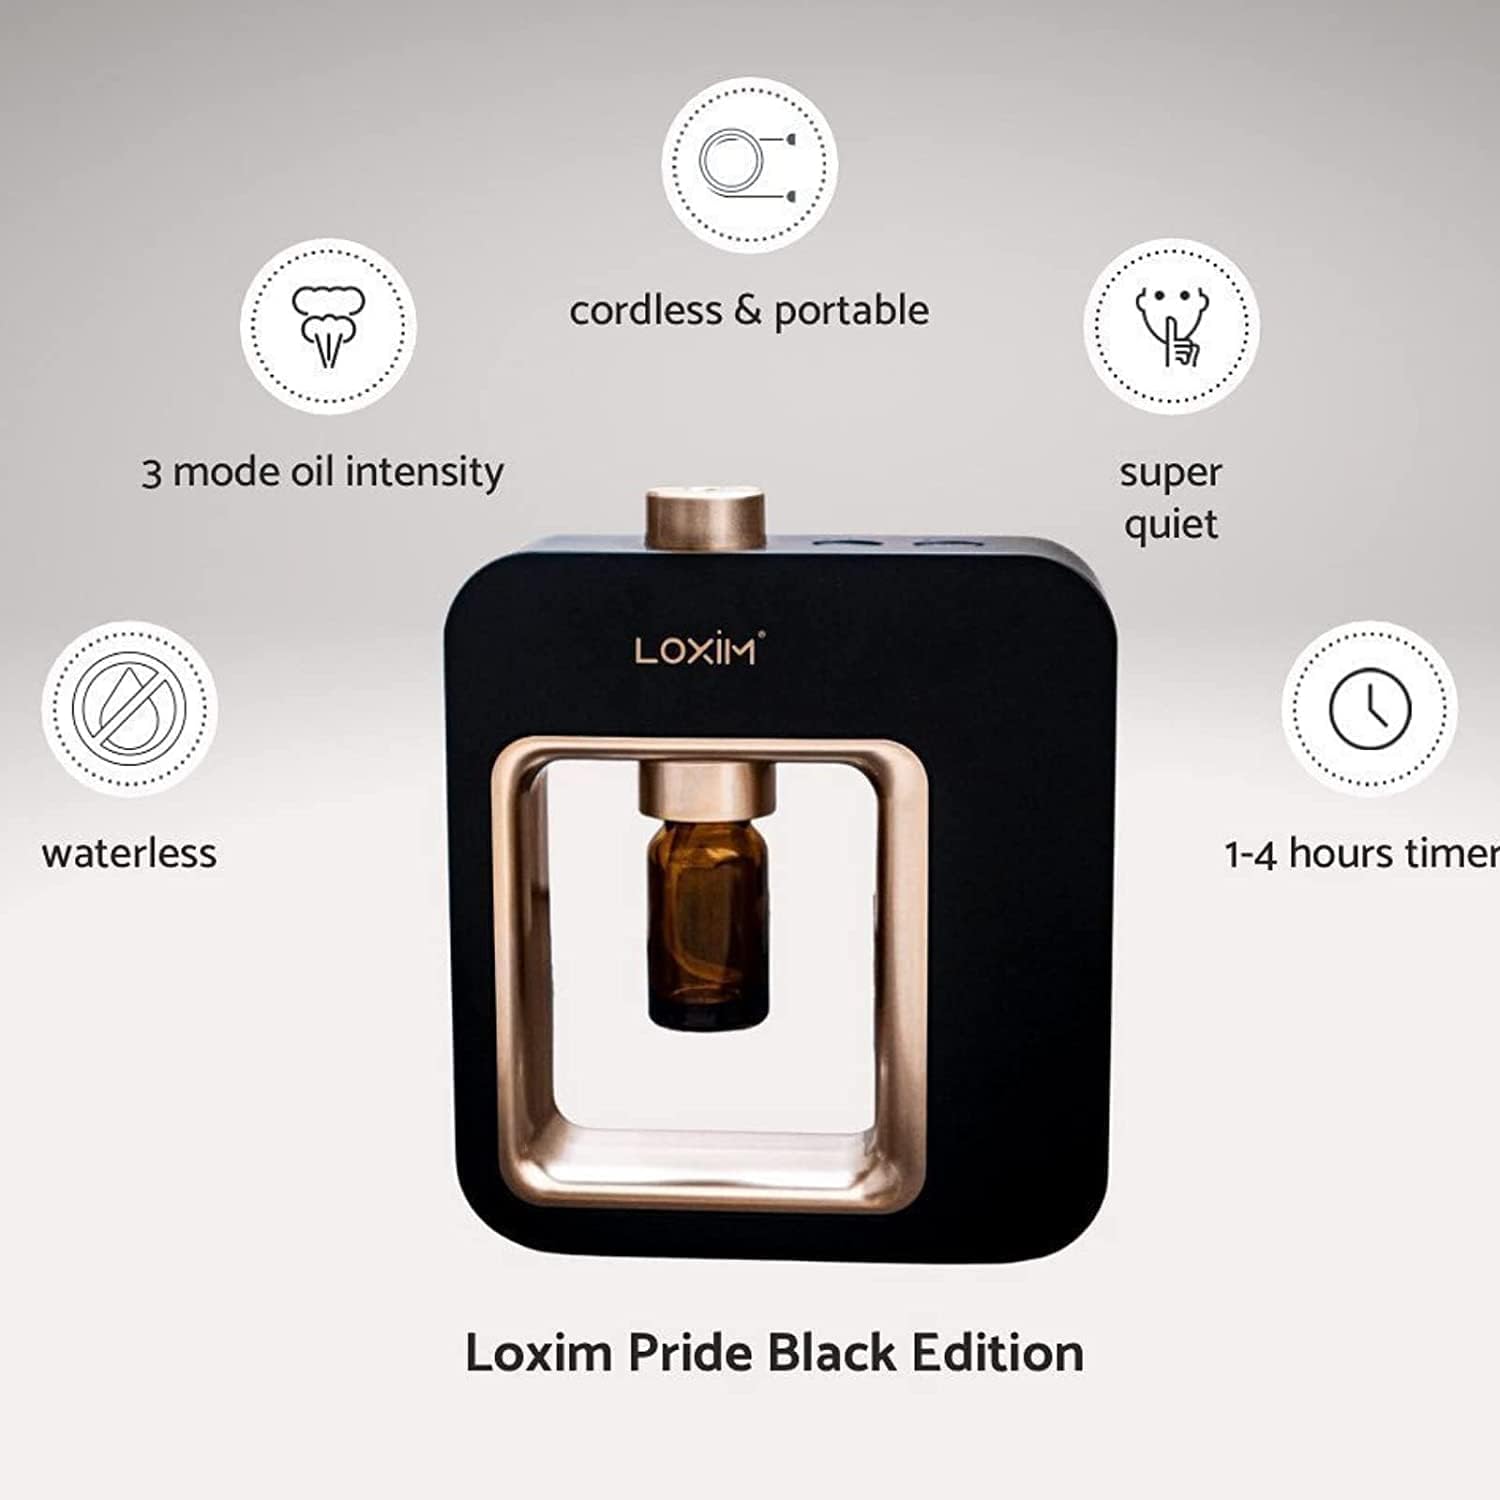 LOXIM Pride Aromatherapy Diffuser - Waterless Nebulizing Diffusers for Essential Oils Large Room, No Water & No Heat & Noiseless & Cordless & Battery Operated for Living Room Office Home Car (Black)